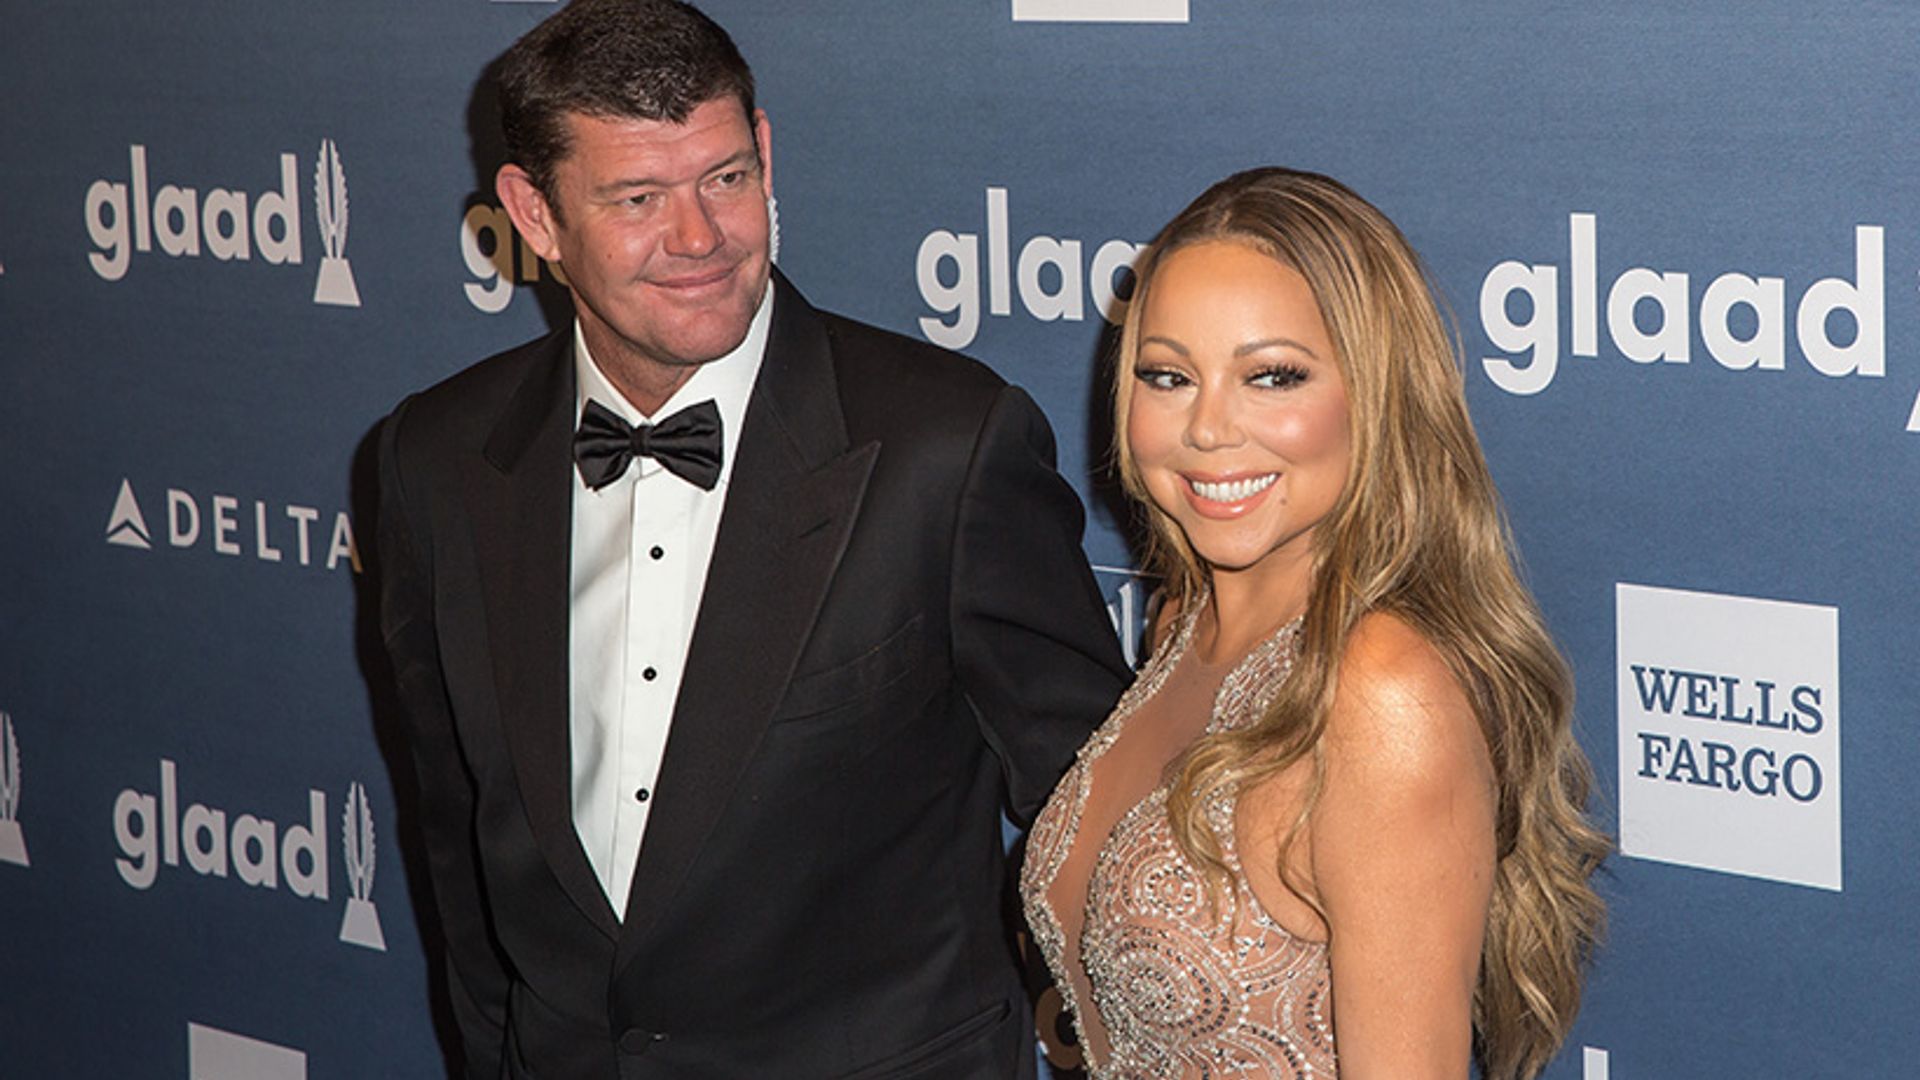 Mariah Carey's rep responds to reports she has split from fiancé James Packer